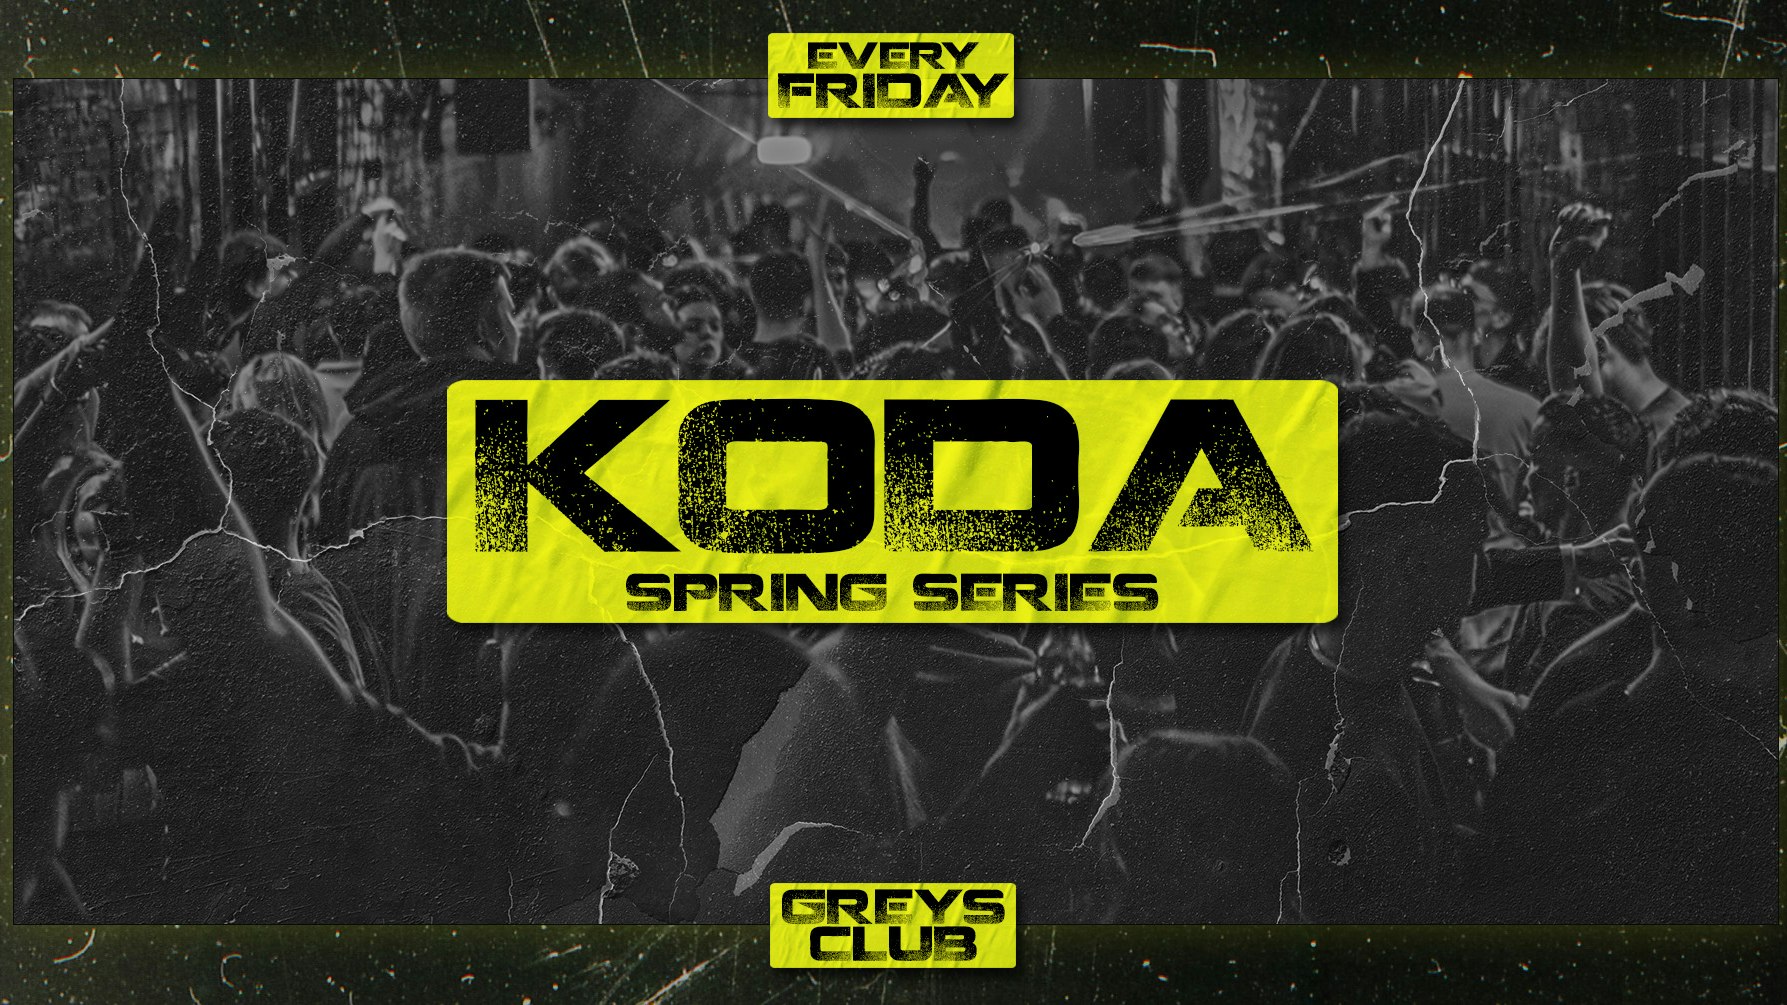 KODA FRIDAYS – SPRING SERIES ⛱️ 84% TICKETS SOLD! // NEW TERRACE LAUNCH 🔆